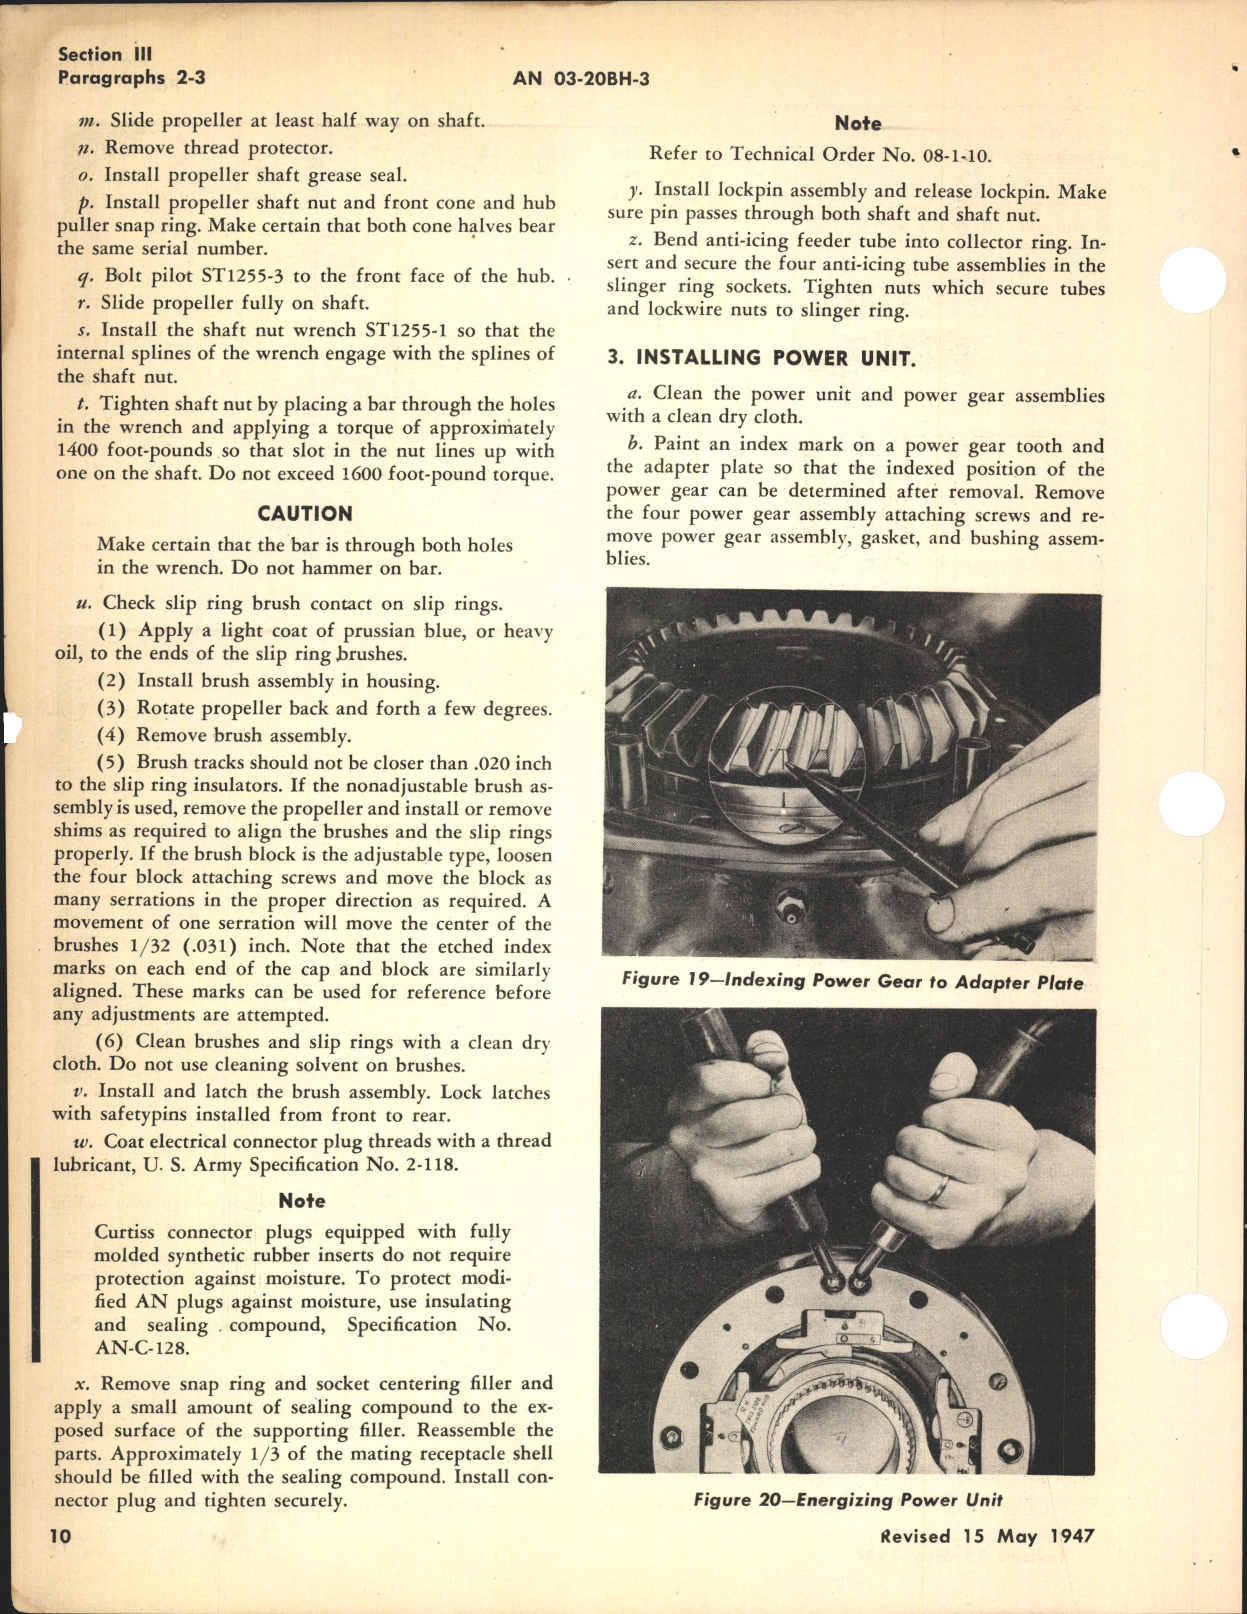 Sample page 8 from AirCorps Library document: Operation, Service, & Overhaul Instructions with Parts Catalog for Electric Propellers